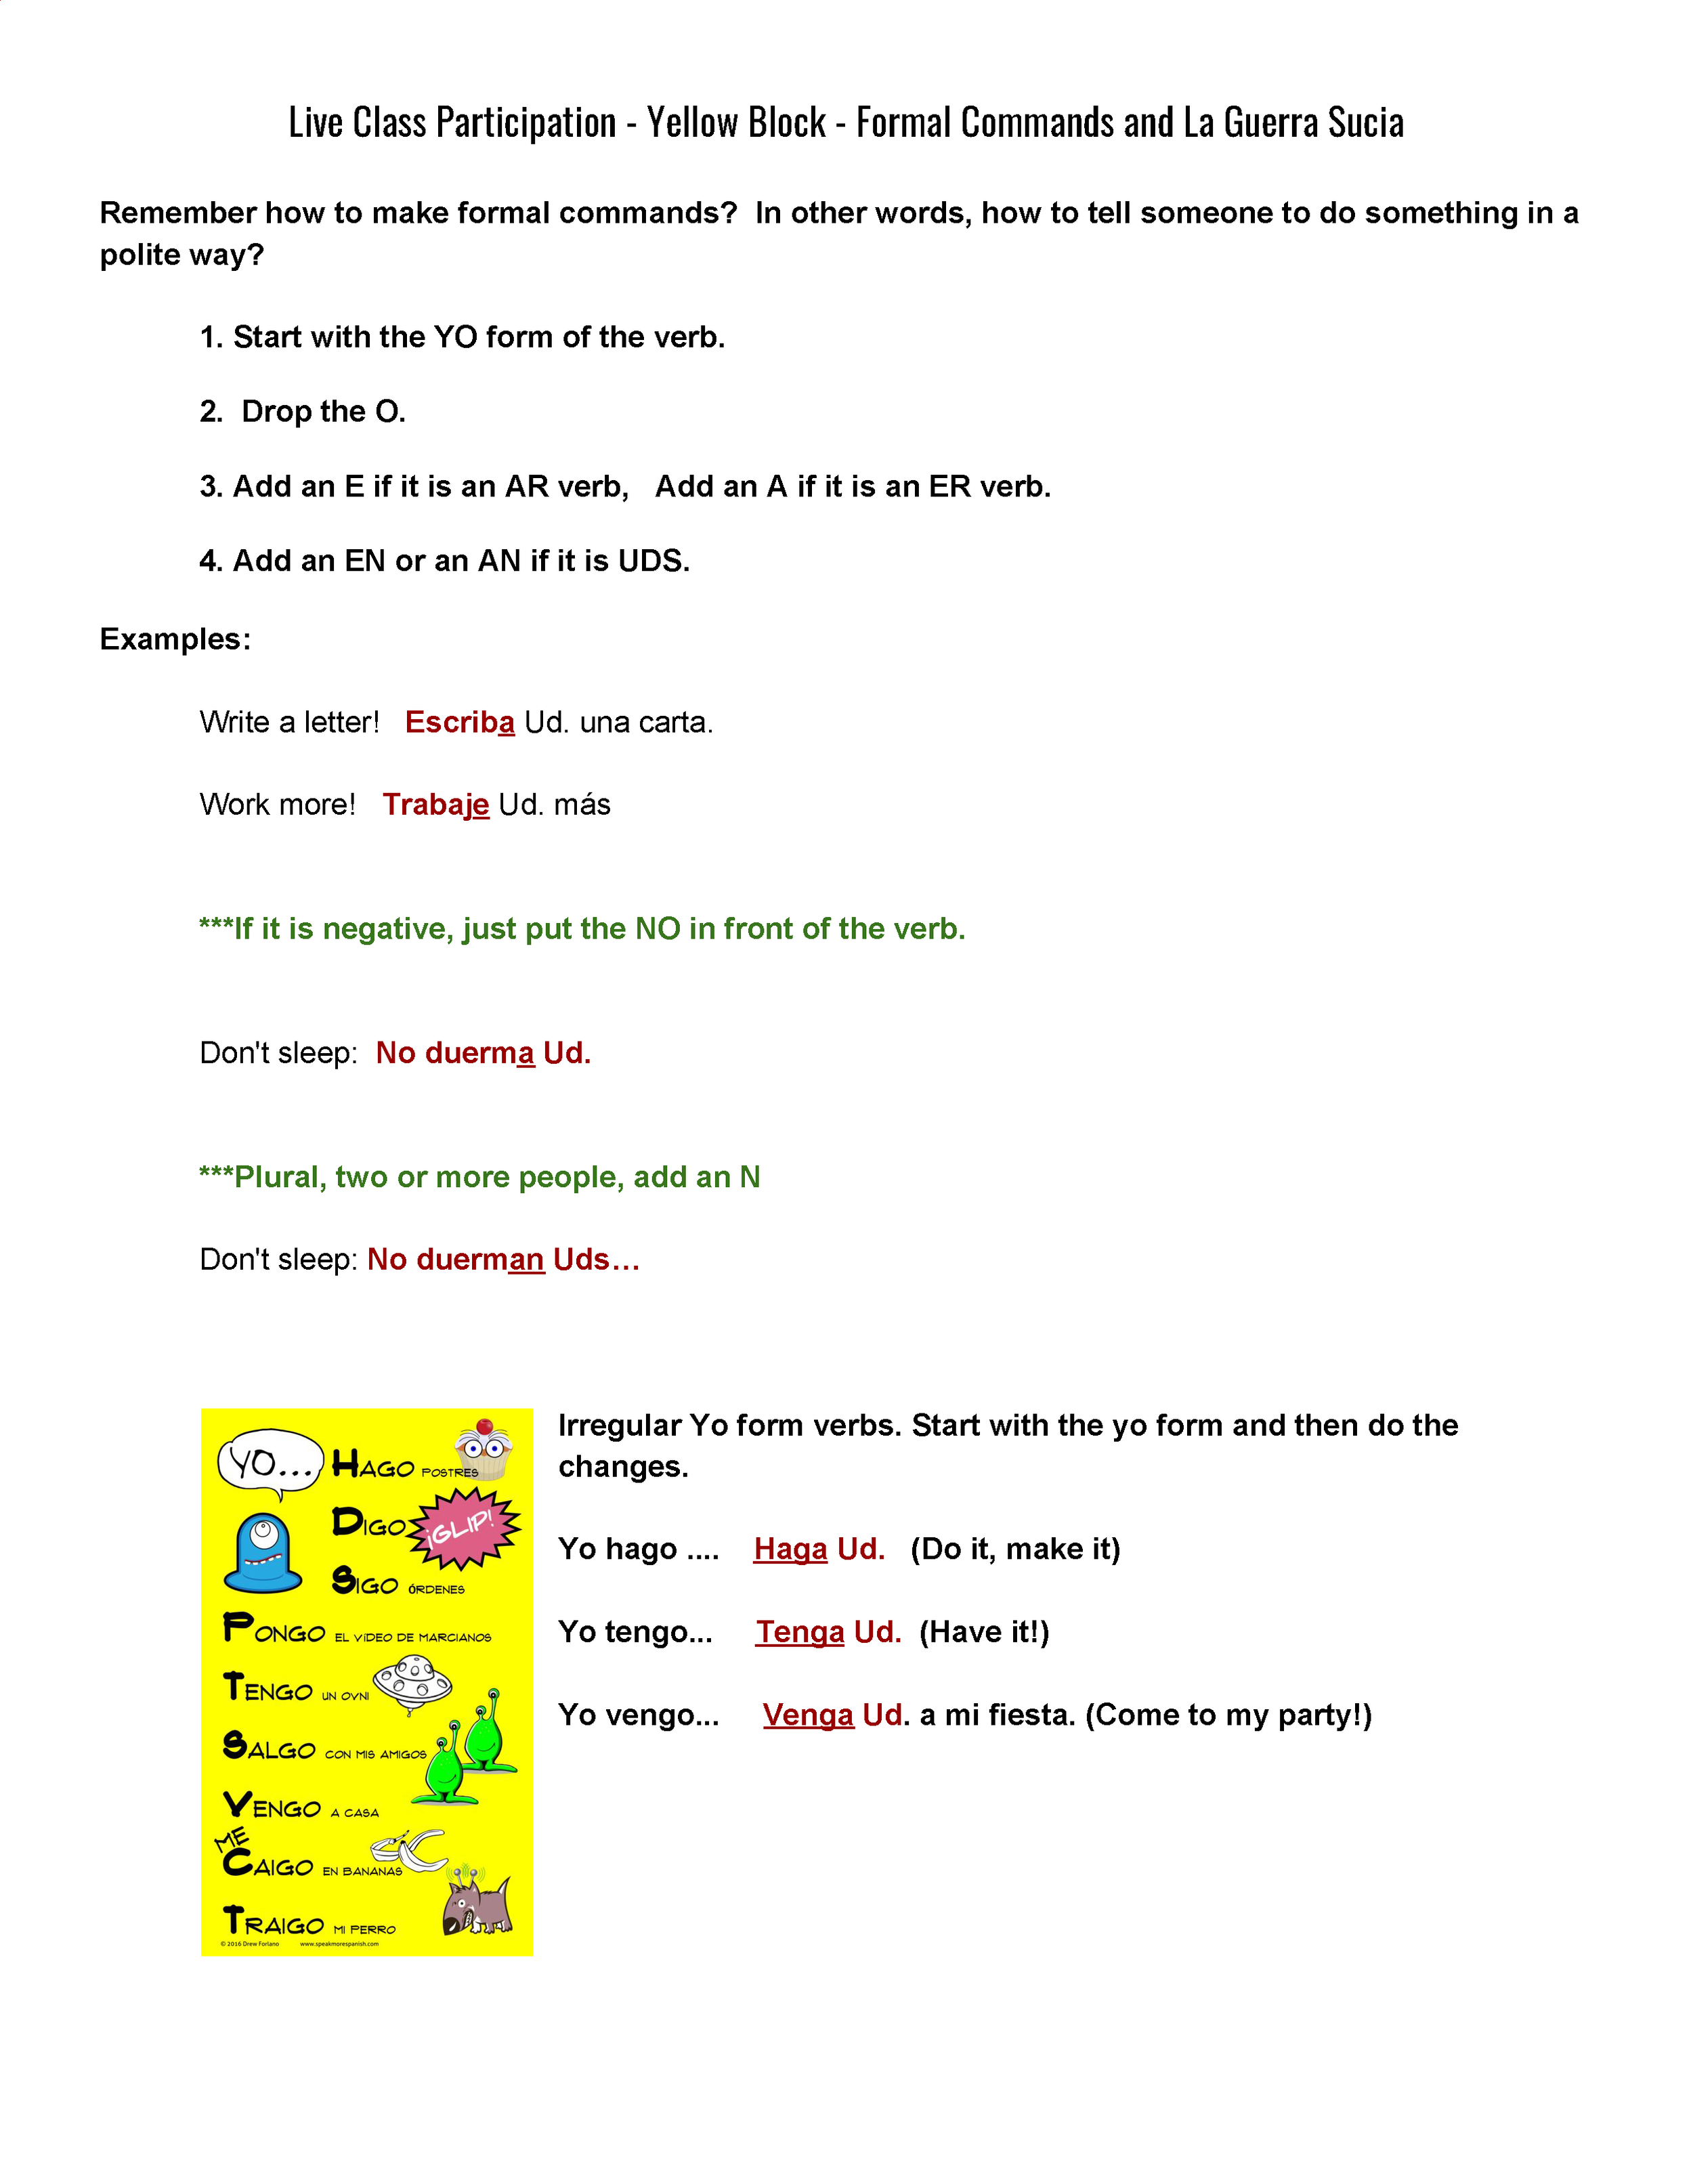 Live Class Participation Worksheet for teaching Spanish online_Page_1.png